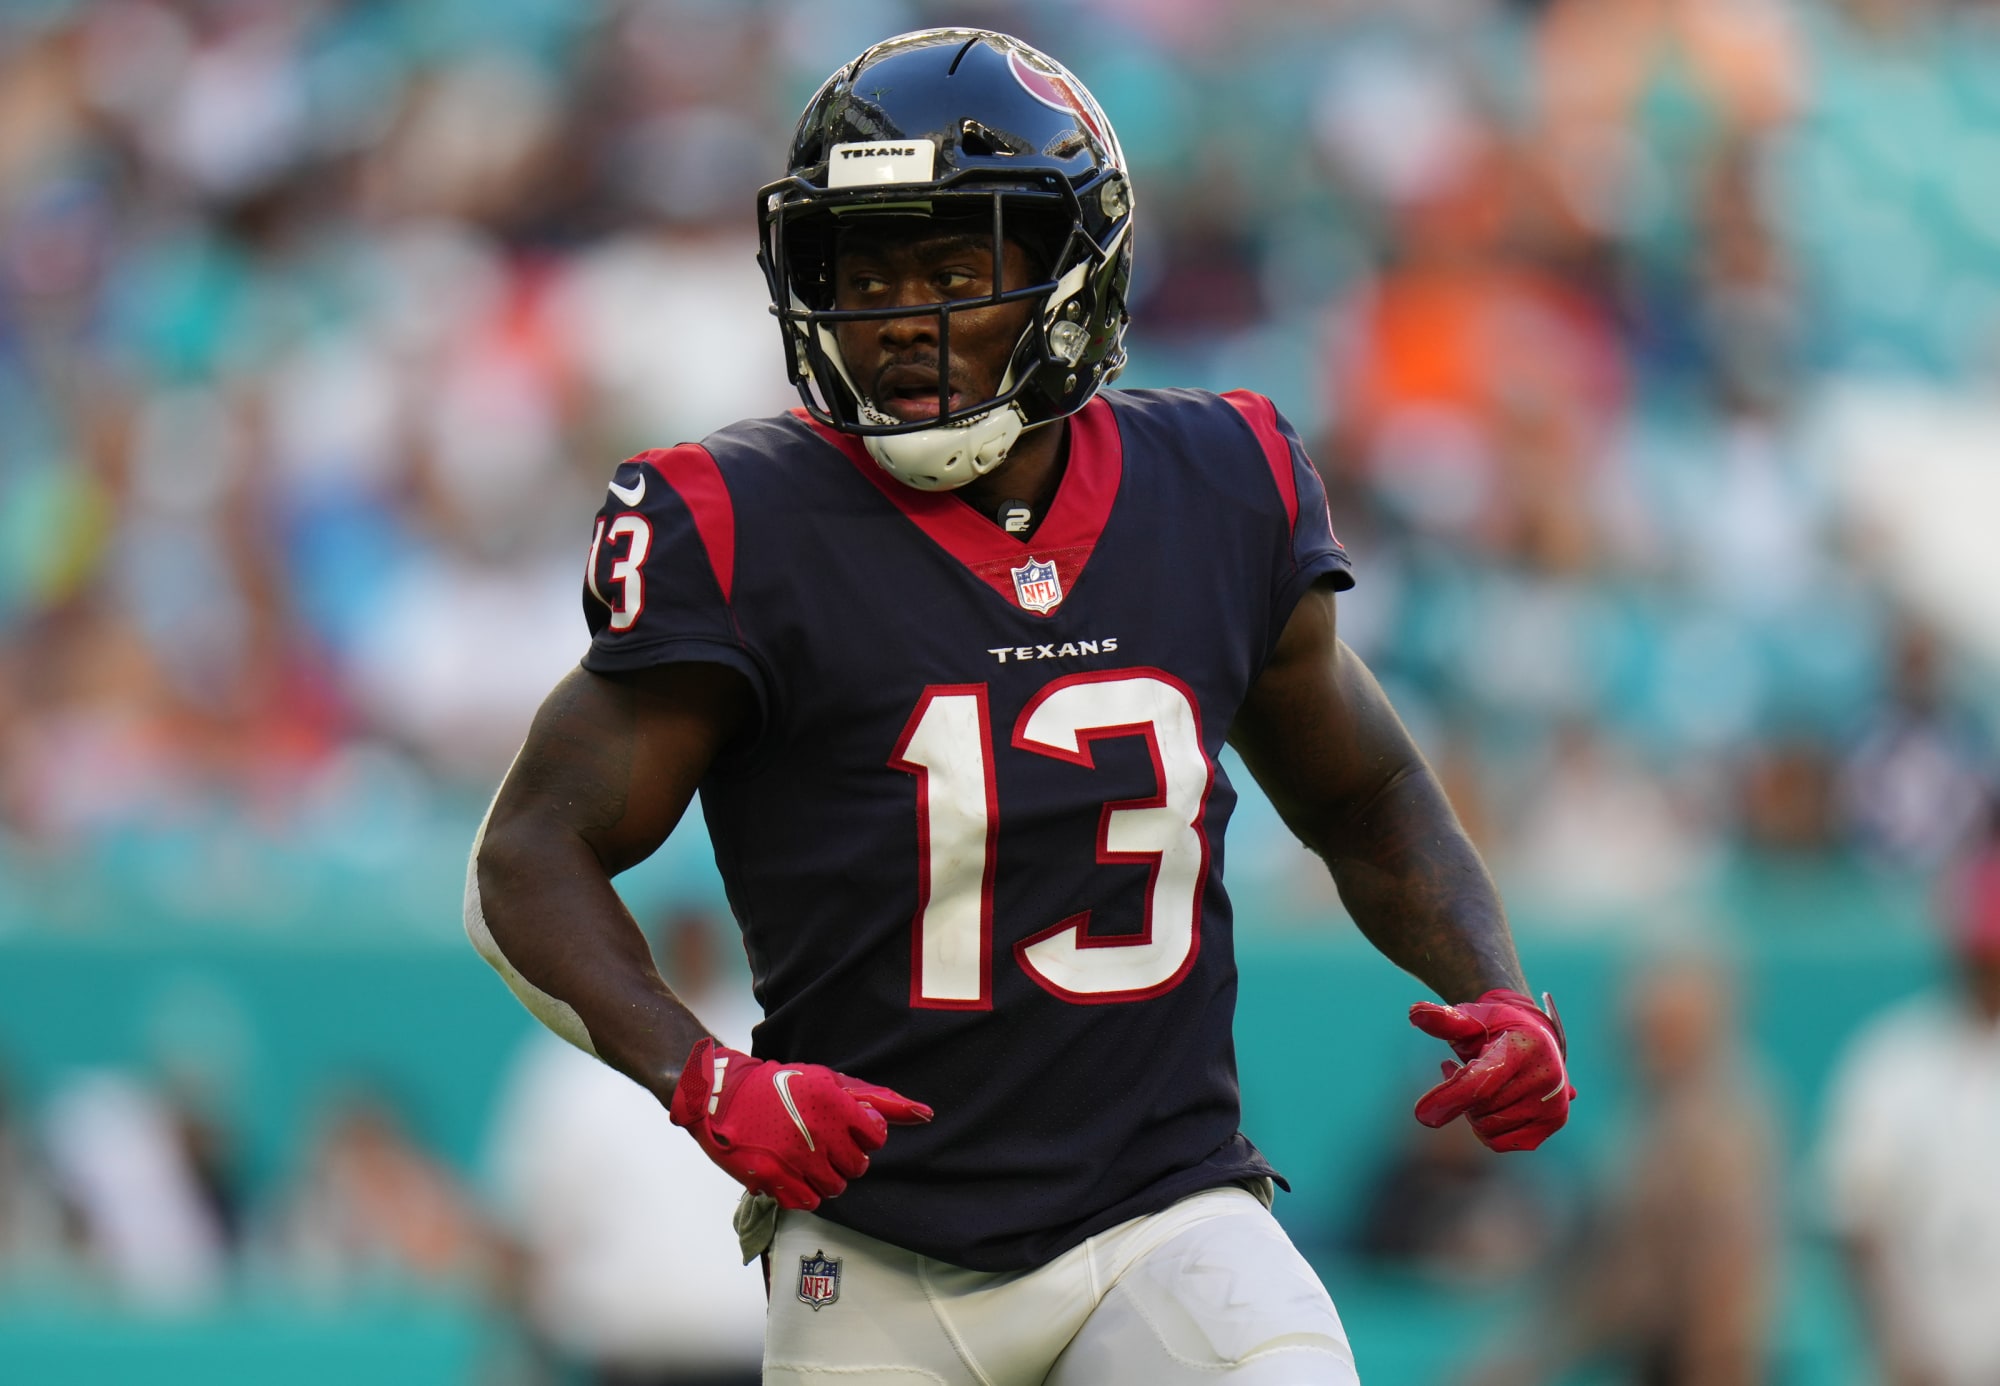 Why didn’t Brandin Cooks get traded? It’s all the Texans fault